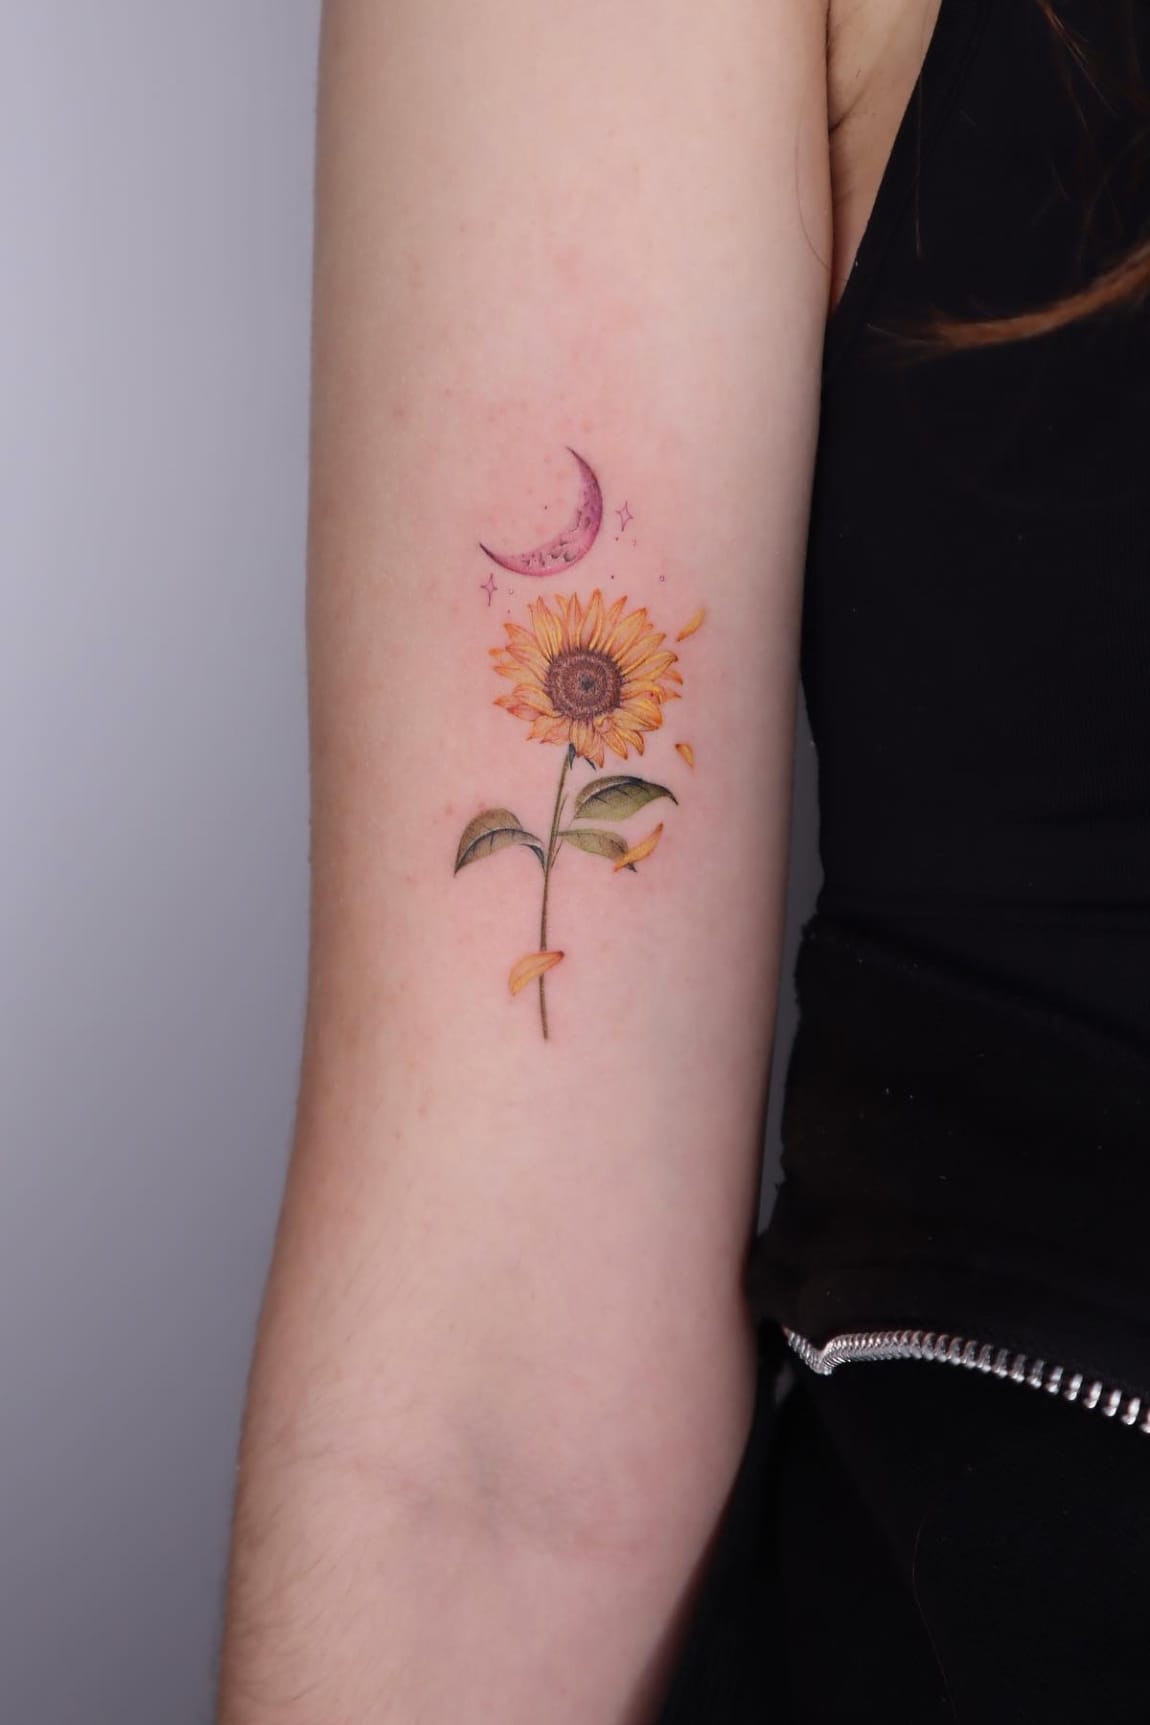 Small sunflower and moon tattoo